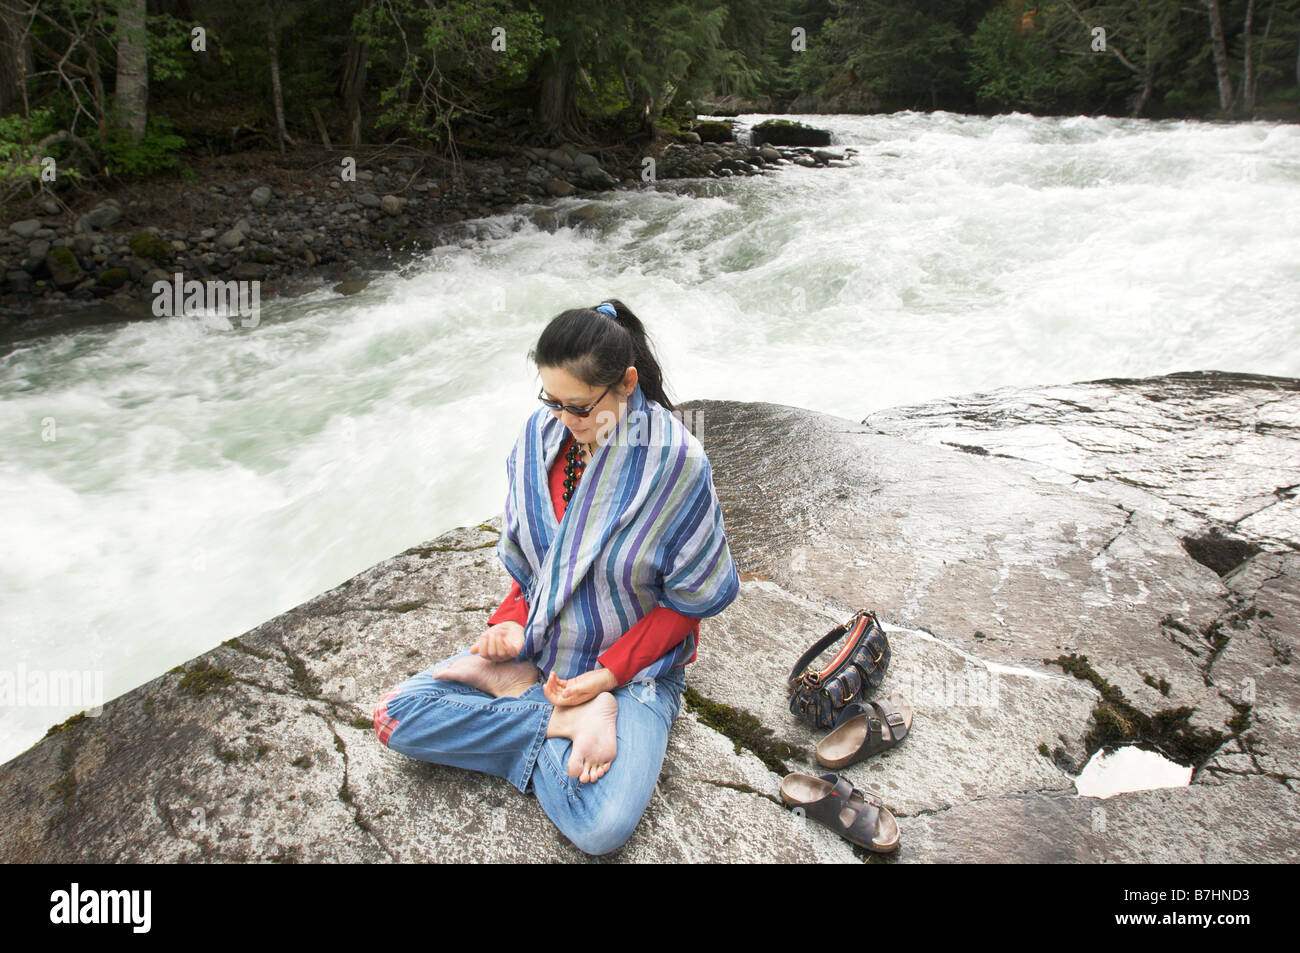 A woman does yoga near a raging river near Whistler British Columbia Canada Stock Photo